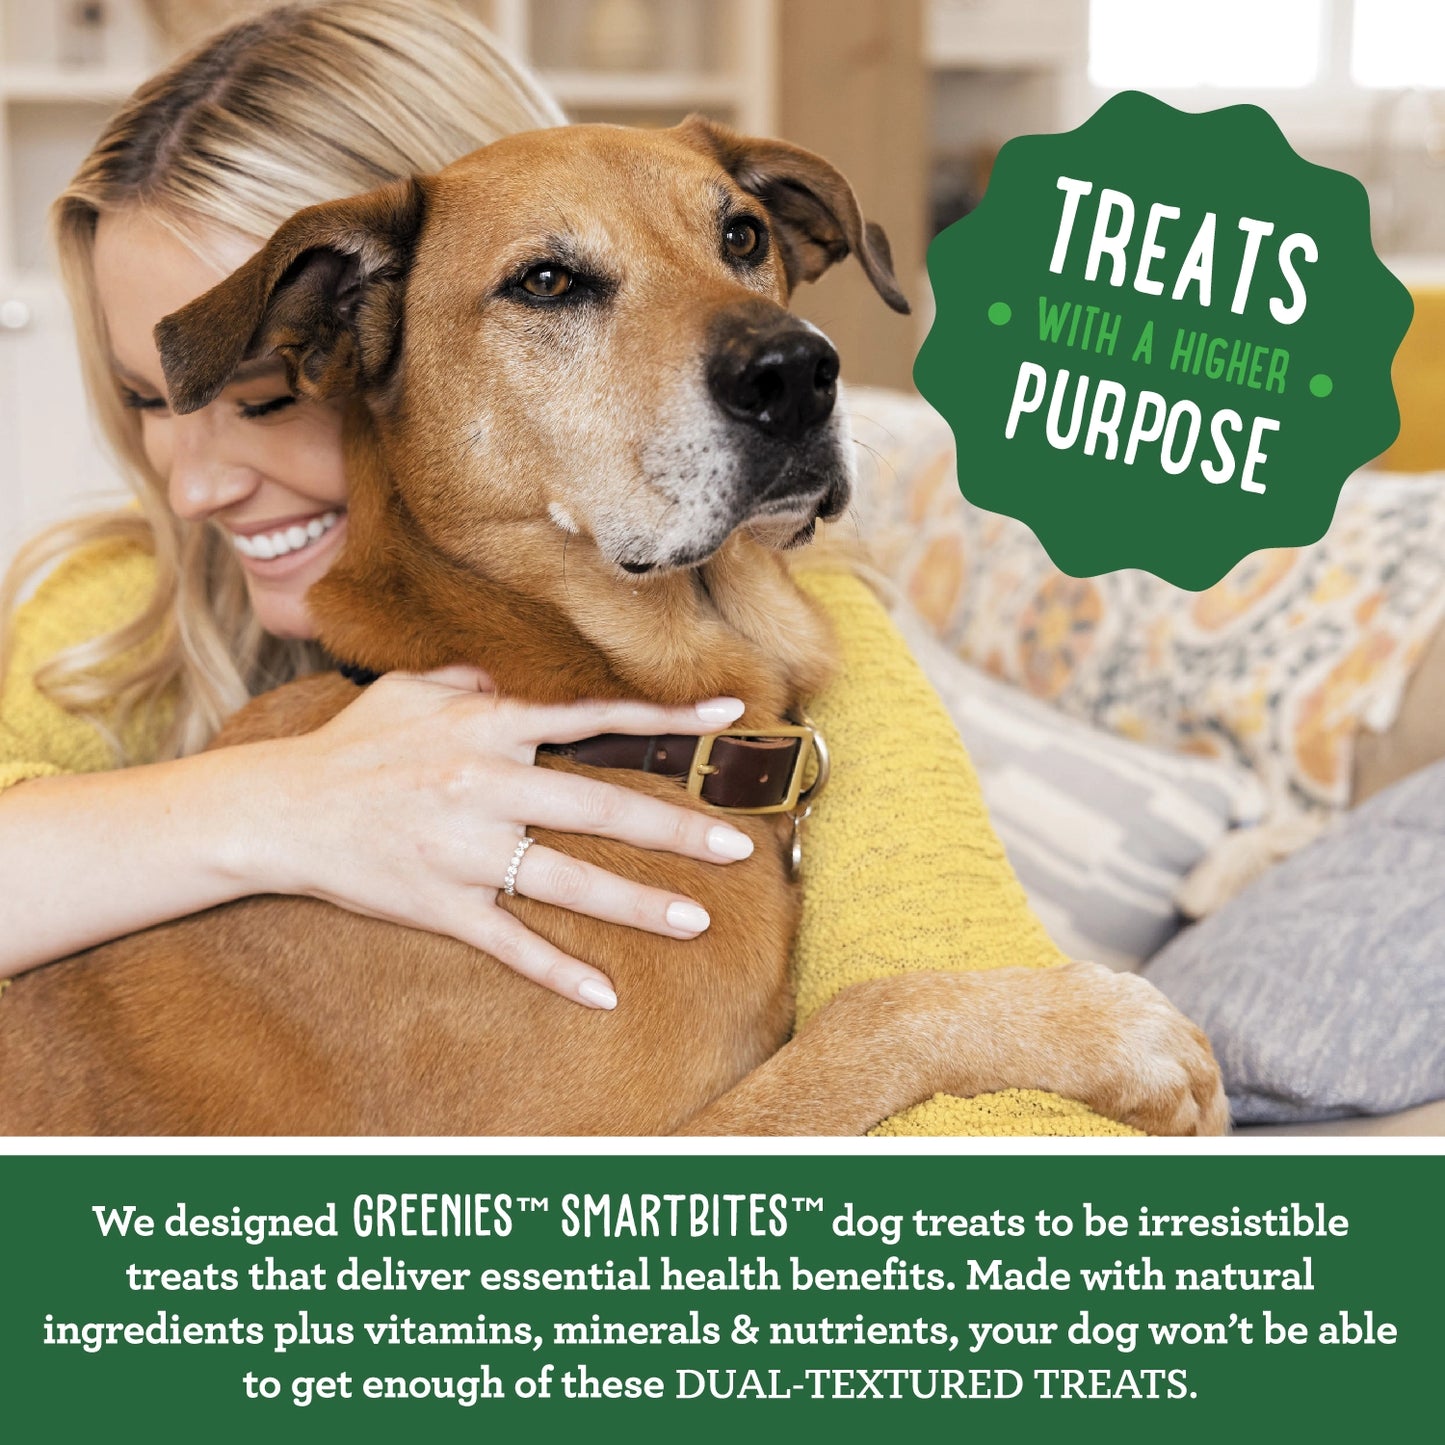 Treats with a Higher Purpose, we designed GREENIES SMARTBITES dog treats to be irresistible treats that deliver essential health benefits. Made with natural ingredients plus vitamins, minerals & nutrients, your dog won't be able to get enough of these dual textured treats